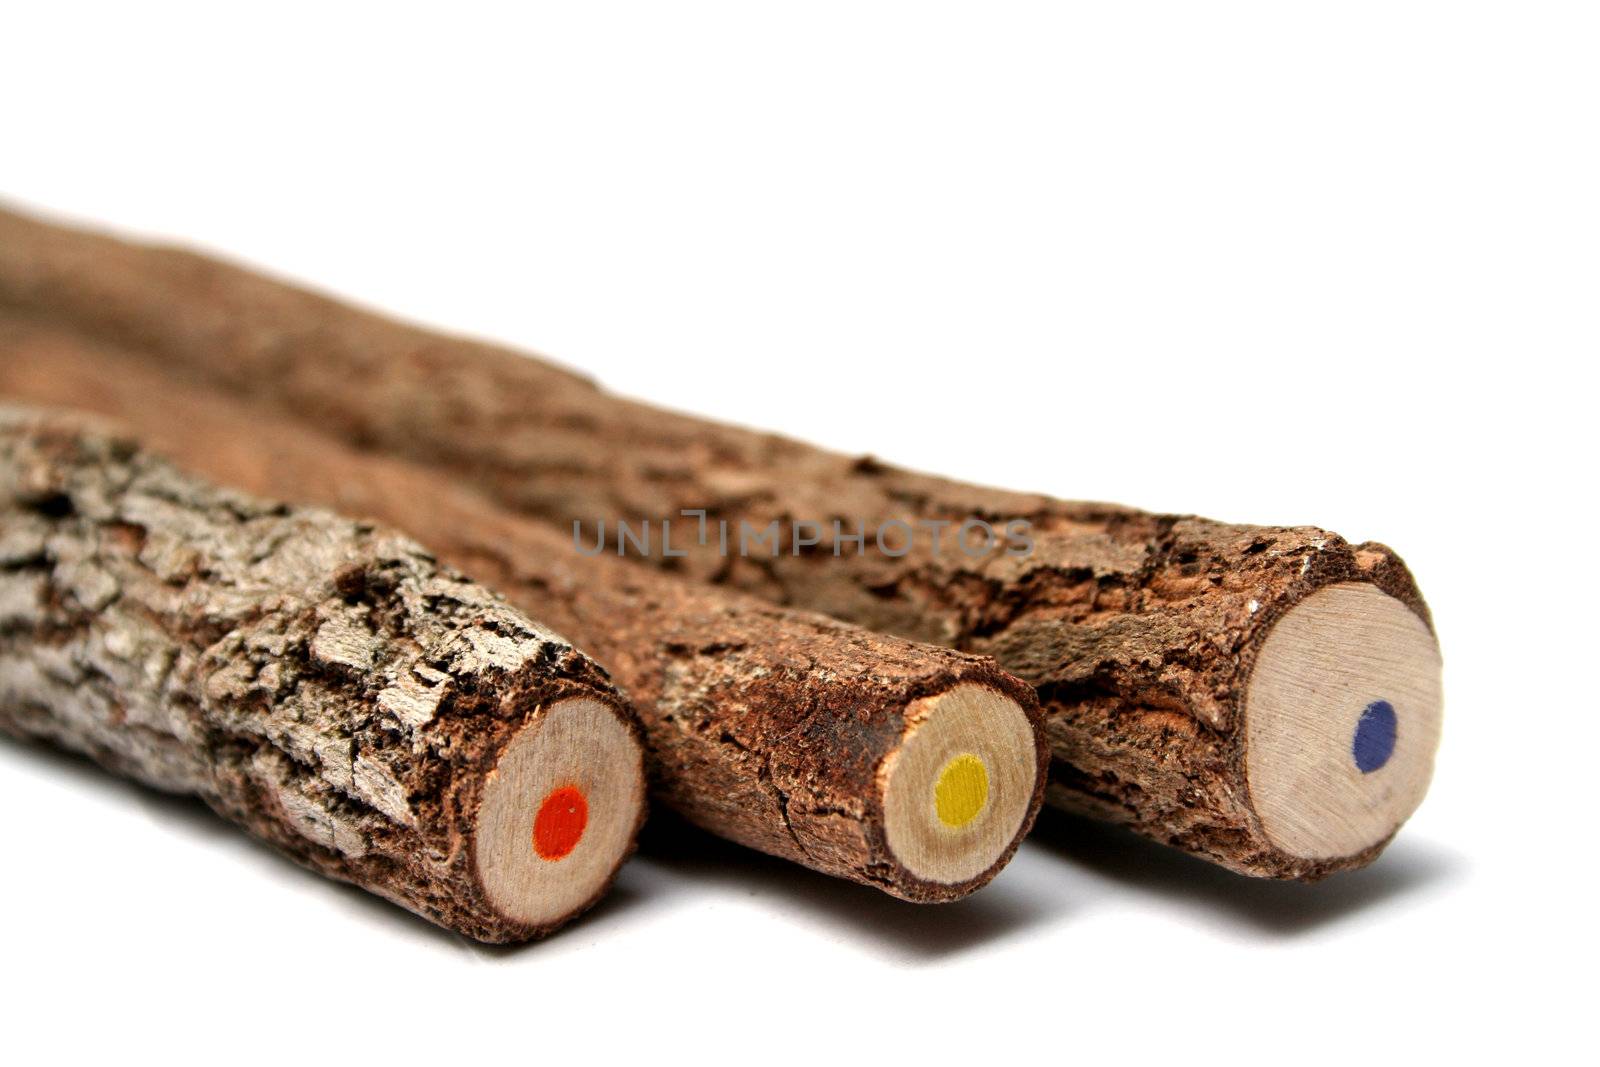 Three unusual pencils made of branches of a tree with a multi-coloured core